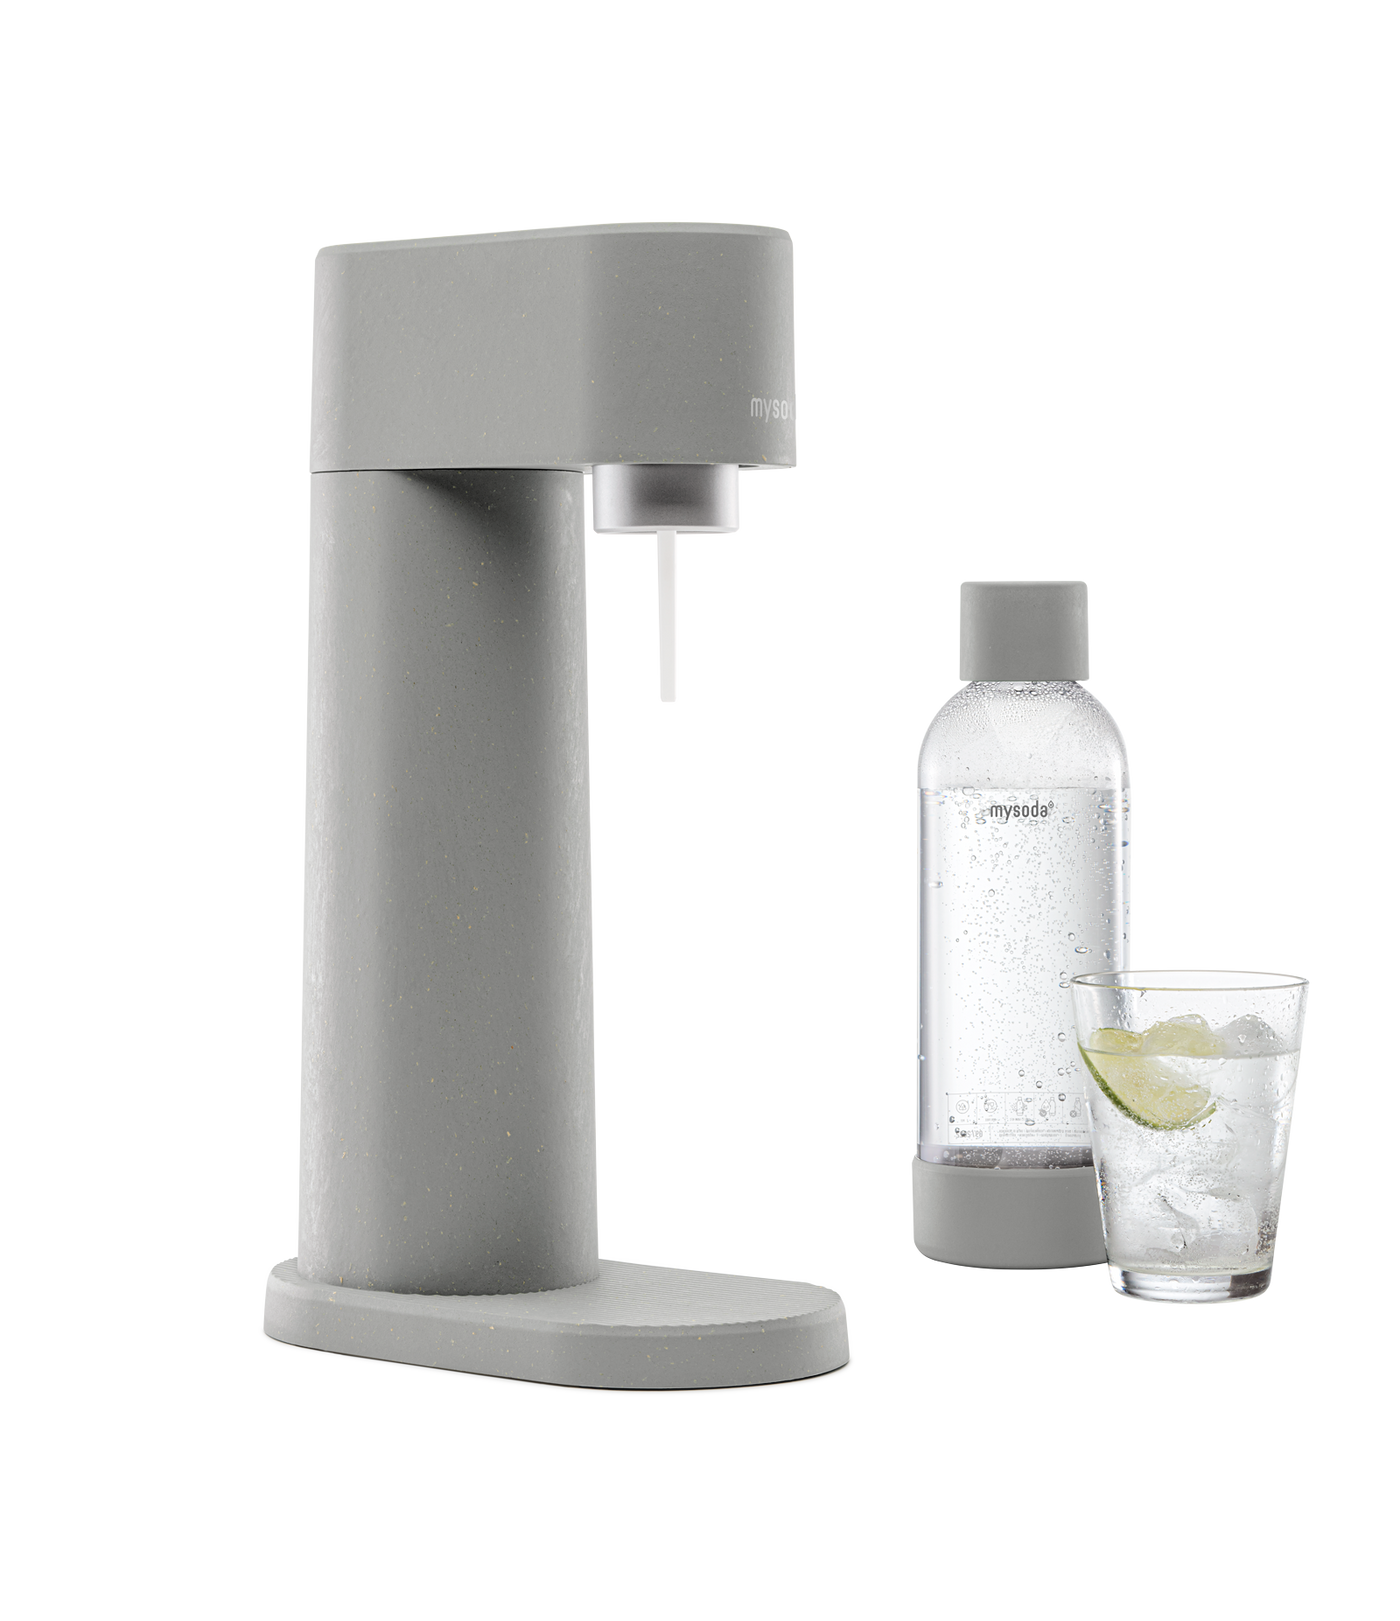 Gray Mysoda Woody sparkling water maker with bottle